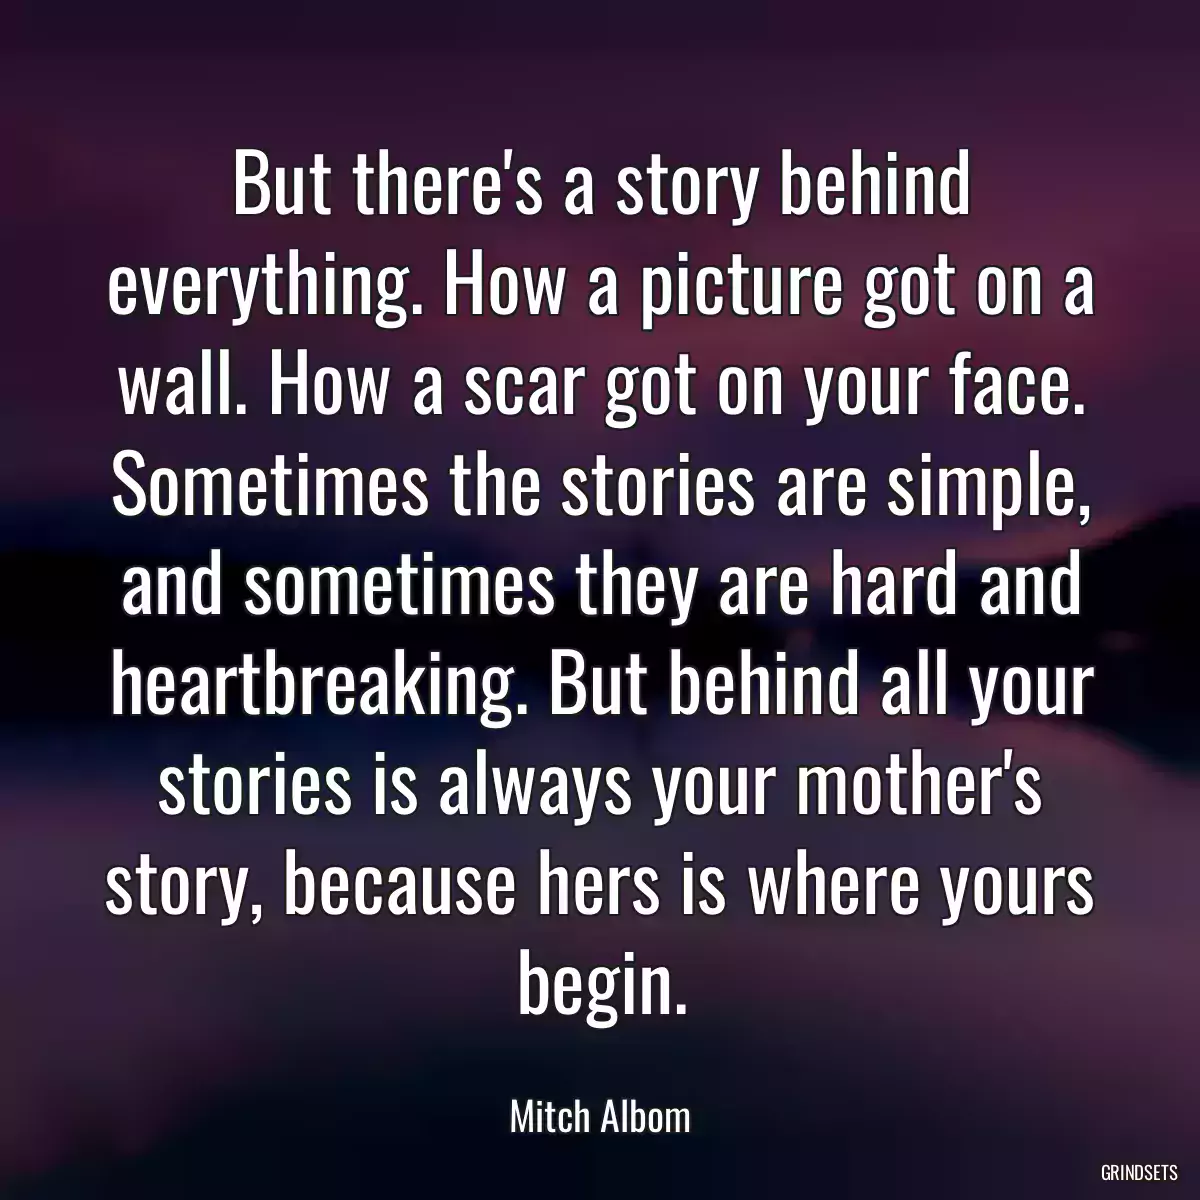 But there\'s a story behind everything. How a picture got on a wall. How a scar got on your face. Sometimes the stories are simple, and sometimes they are hard and heartbreaking. But behind all your stories is always your mother\'s story, because hers is where yours begin.